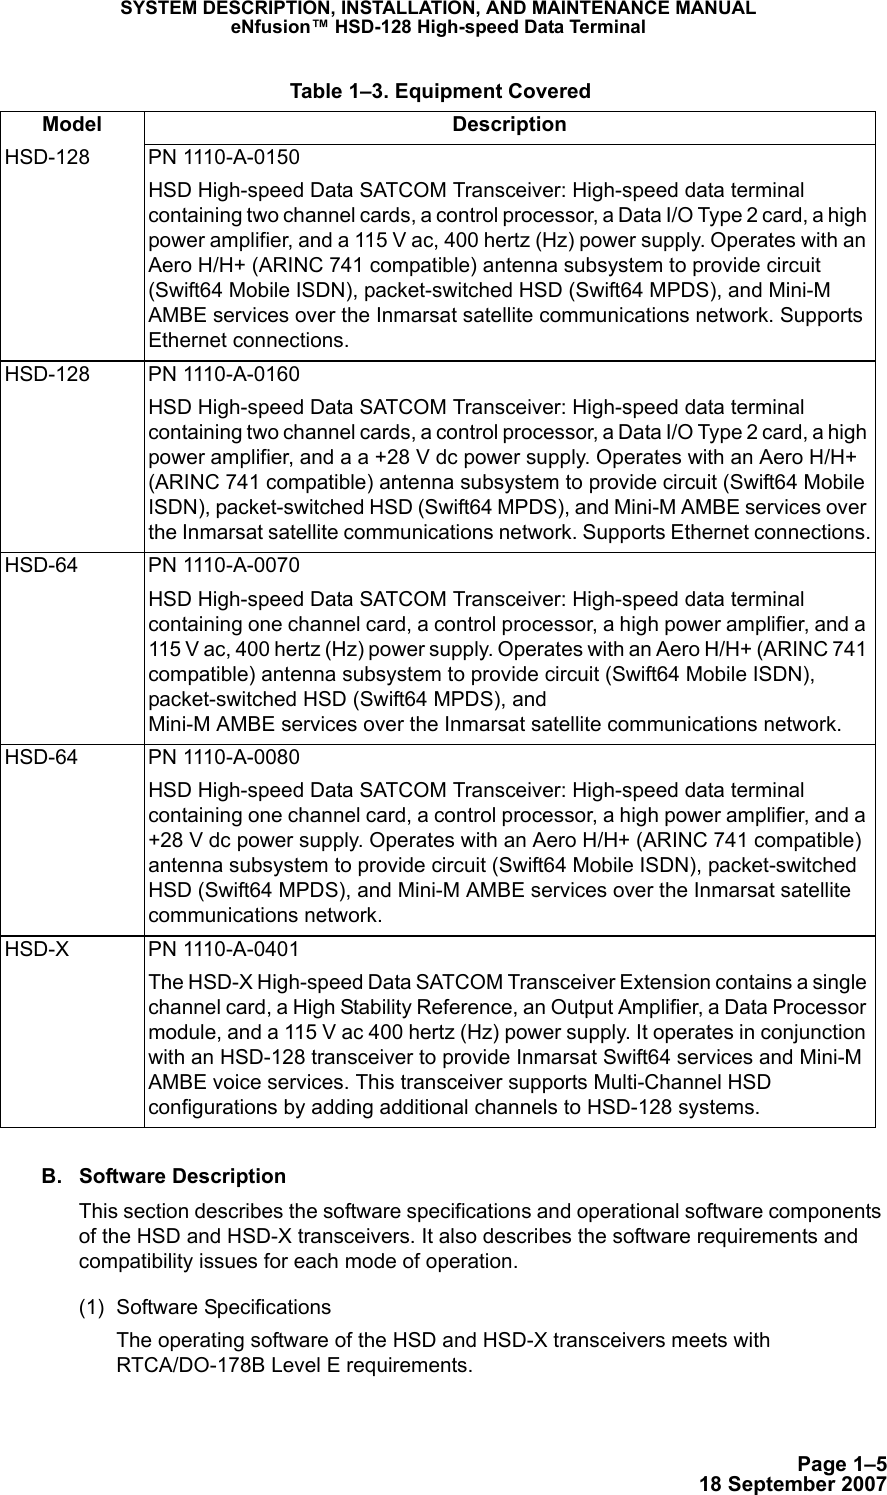 Page 1–518 September 2007SYSTEM DESCRIPTION, INSTALLATION, AND MAINTENANCE MANUALeNfusion™ HSD-128 High-speed Data TerminalB. Software DescriptionThis section describes the software specifications and operational software components of the HSD and HSD-X transceivers. It also describes the software requirements and compatibility issues for each mode of operation. (1) Software SpecificationsThe operating software of the HSD and HSD-X transceivers meets with RTCA/DO-178B Level E requirements.HSD-128 PN 1110-A-0150HSD High-speed Data SATCOM Transceiver: High-speed data terminal containing two channel cards, a control processor, a Data I/O Type 2 card, a high power amplifier, and a 115 V ac, 400 hertz (Hz) power supply. Operates with an Aero H/H+ (ARINC 741 compatible) antenna subsystem to provide circuit (Swift64 Mobile ISDN), packet-switched HSD (Swift64 MPDS), and Mini-M AMBE services over the Inmarsat satellite communications network. Supports Ethernet connections.HSD-128 PN 1110-A-0160HSD High-speed Data SATCOM Transceiver: High-speed data terminal containing two channel cards, a control processor, a Data I/O Type 2 card, a high power amplifier, and a a +28 V dc power supply. Operates with an Aero H/H+ (ARINC 741 compatible) antenna subsystem to provide circuit (Swift64 Mobile ISDN), packet-switched HSD (Swift64 MPDS), and Mini-M AMBE services over the Inmarsat satellite communications network. Supports Ethernet connections.HSD-64 PN 1110-A-0070HSD High-speed Data SATCOM Transceiver: High-speed data terminal containing one channel card, a control processor, a high power amplifier, and a 115 V ac, 400 hertz (Hz) power supply. Operates with an Aero H/H+ (ARINC 741 compatible) antenna subsystem to provide circuit (Swift64 Mobile ISDN), packet-switched HSD (Swift64 MPDS), and  Mini-M AMBE services over the Inmarsat satellite communications network.HSD-64 PN 1110-A-0080HSD High-speed Data SATCOM Transceiver: High-speed data terminal containing one channel card, a control processor, a high power amplifier, and a +28 V dc power supply. Operates with an Aero H/H+ (ARINC 741 compatible) antenna subsystem to provide circuit (Swift64 Mobile ISDN), packet-switched HSD (Swift64 MPDS), and Mini-M AMBE services over the Inmarsat satellite communications network.HSD-X PN 1110-A-0401The HSD-X High-speed Data SATCOM Transceiver Extension contains a single channel card, a High Stability Reference, an Output Amplifier, a Data Processor module, and a 115 V ac 400 hertz (Hz) power supply. It operates in conjunction with an HSD-128 transceiver to provide Inmarsat Swift64 services and Mini-M AMBE voice services. This transceiver supports Multi-Channel HSD configurations by adding additional channels to HSD-128 systems. Table 1–3. Equipment CoveredModel Description